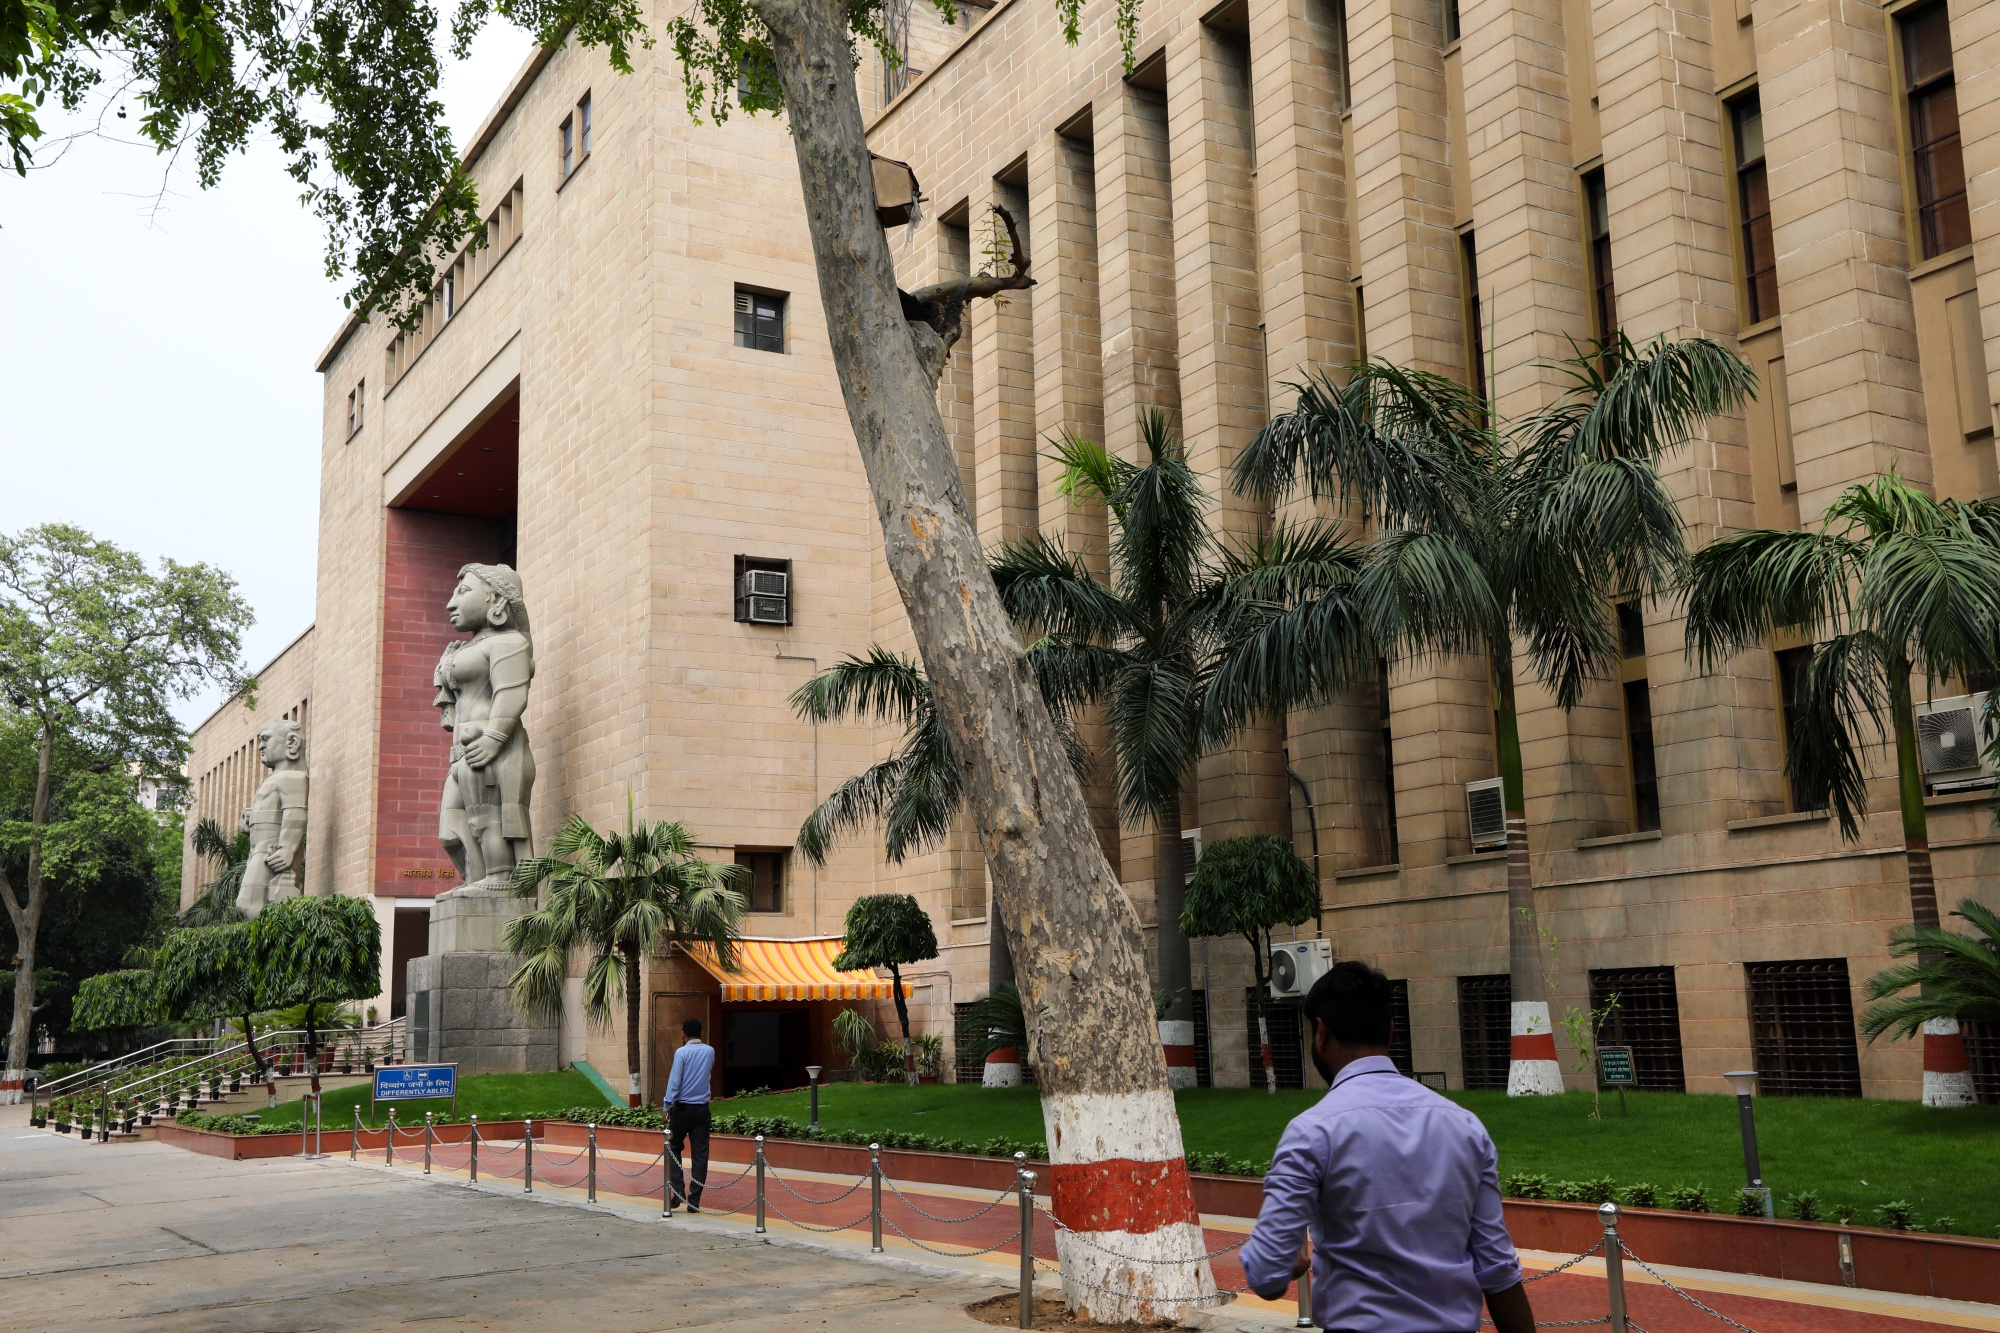 The Reserve Bank of India regional headquarters stand in New Delhi.